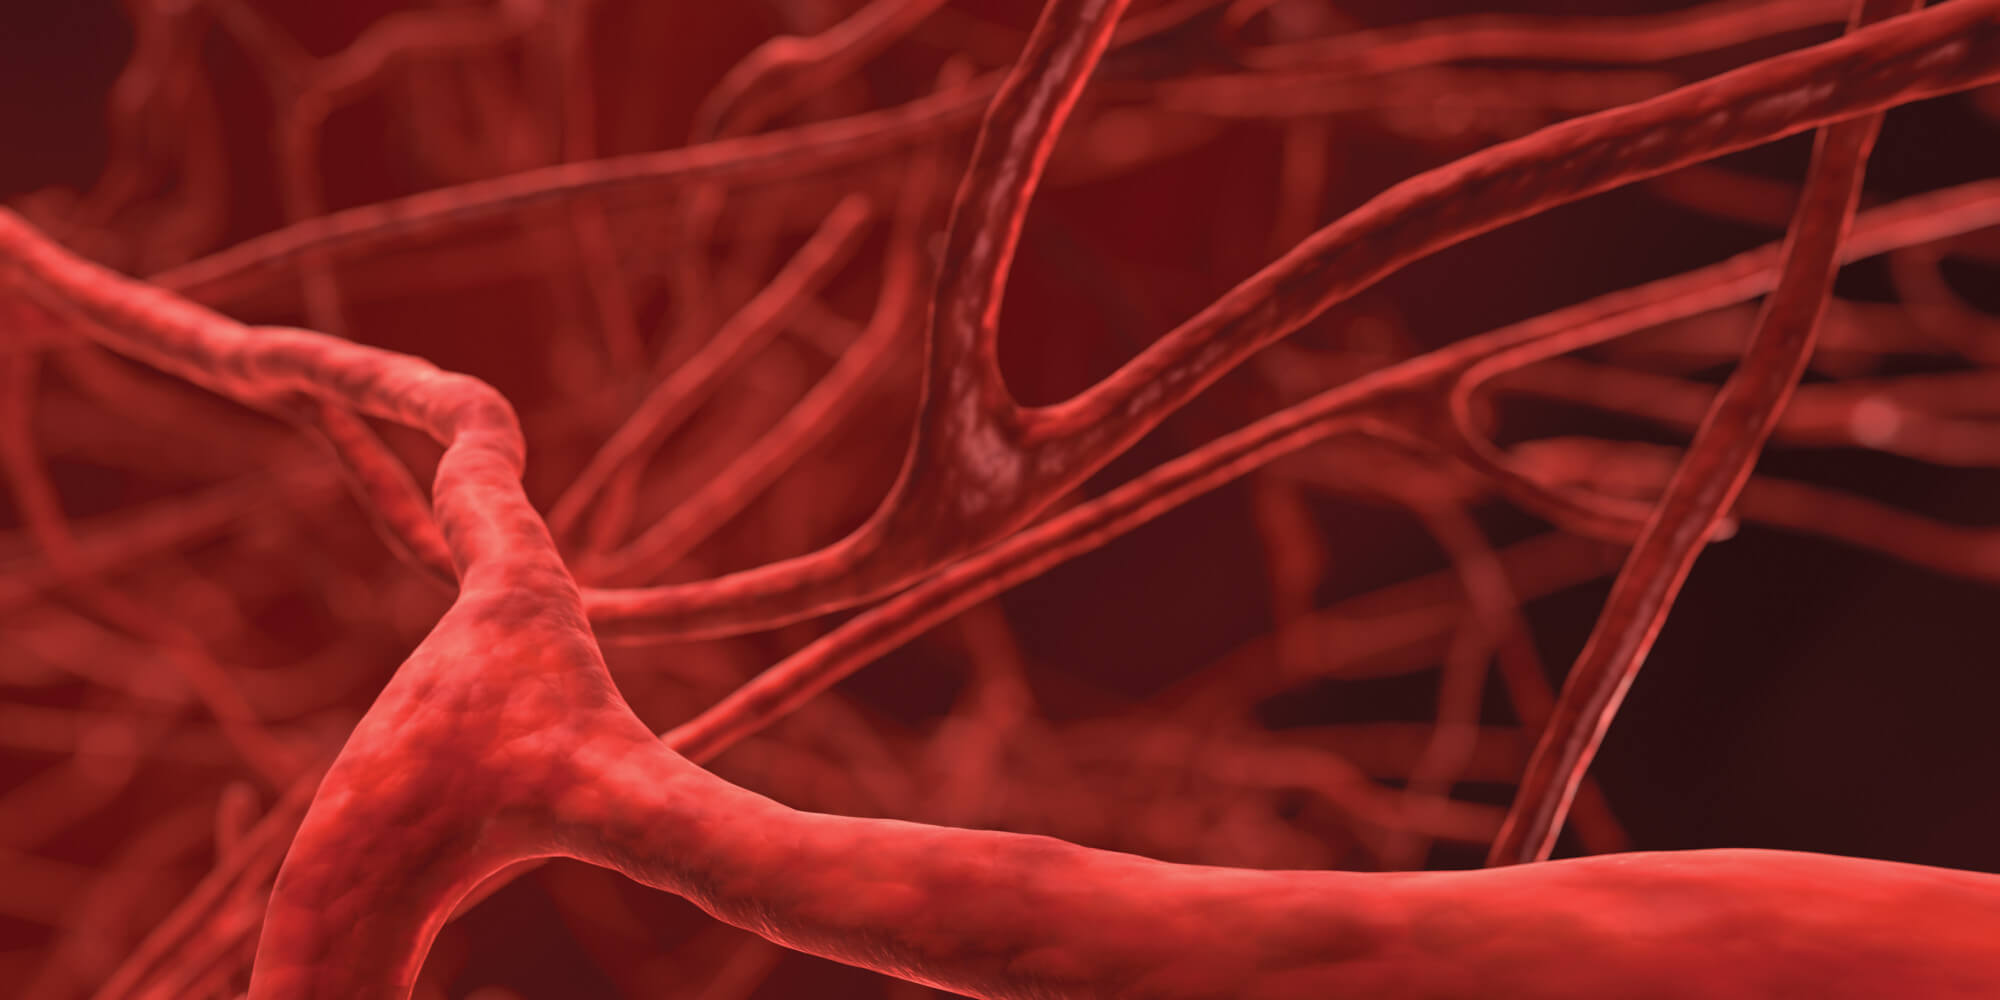 Getting Started with In-Vitro Blood Vessel Research